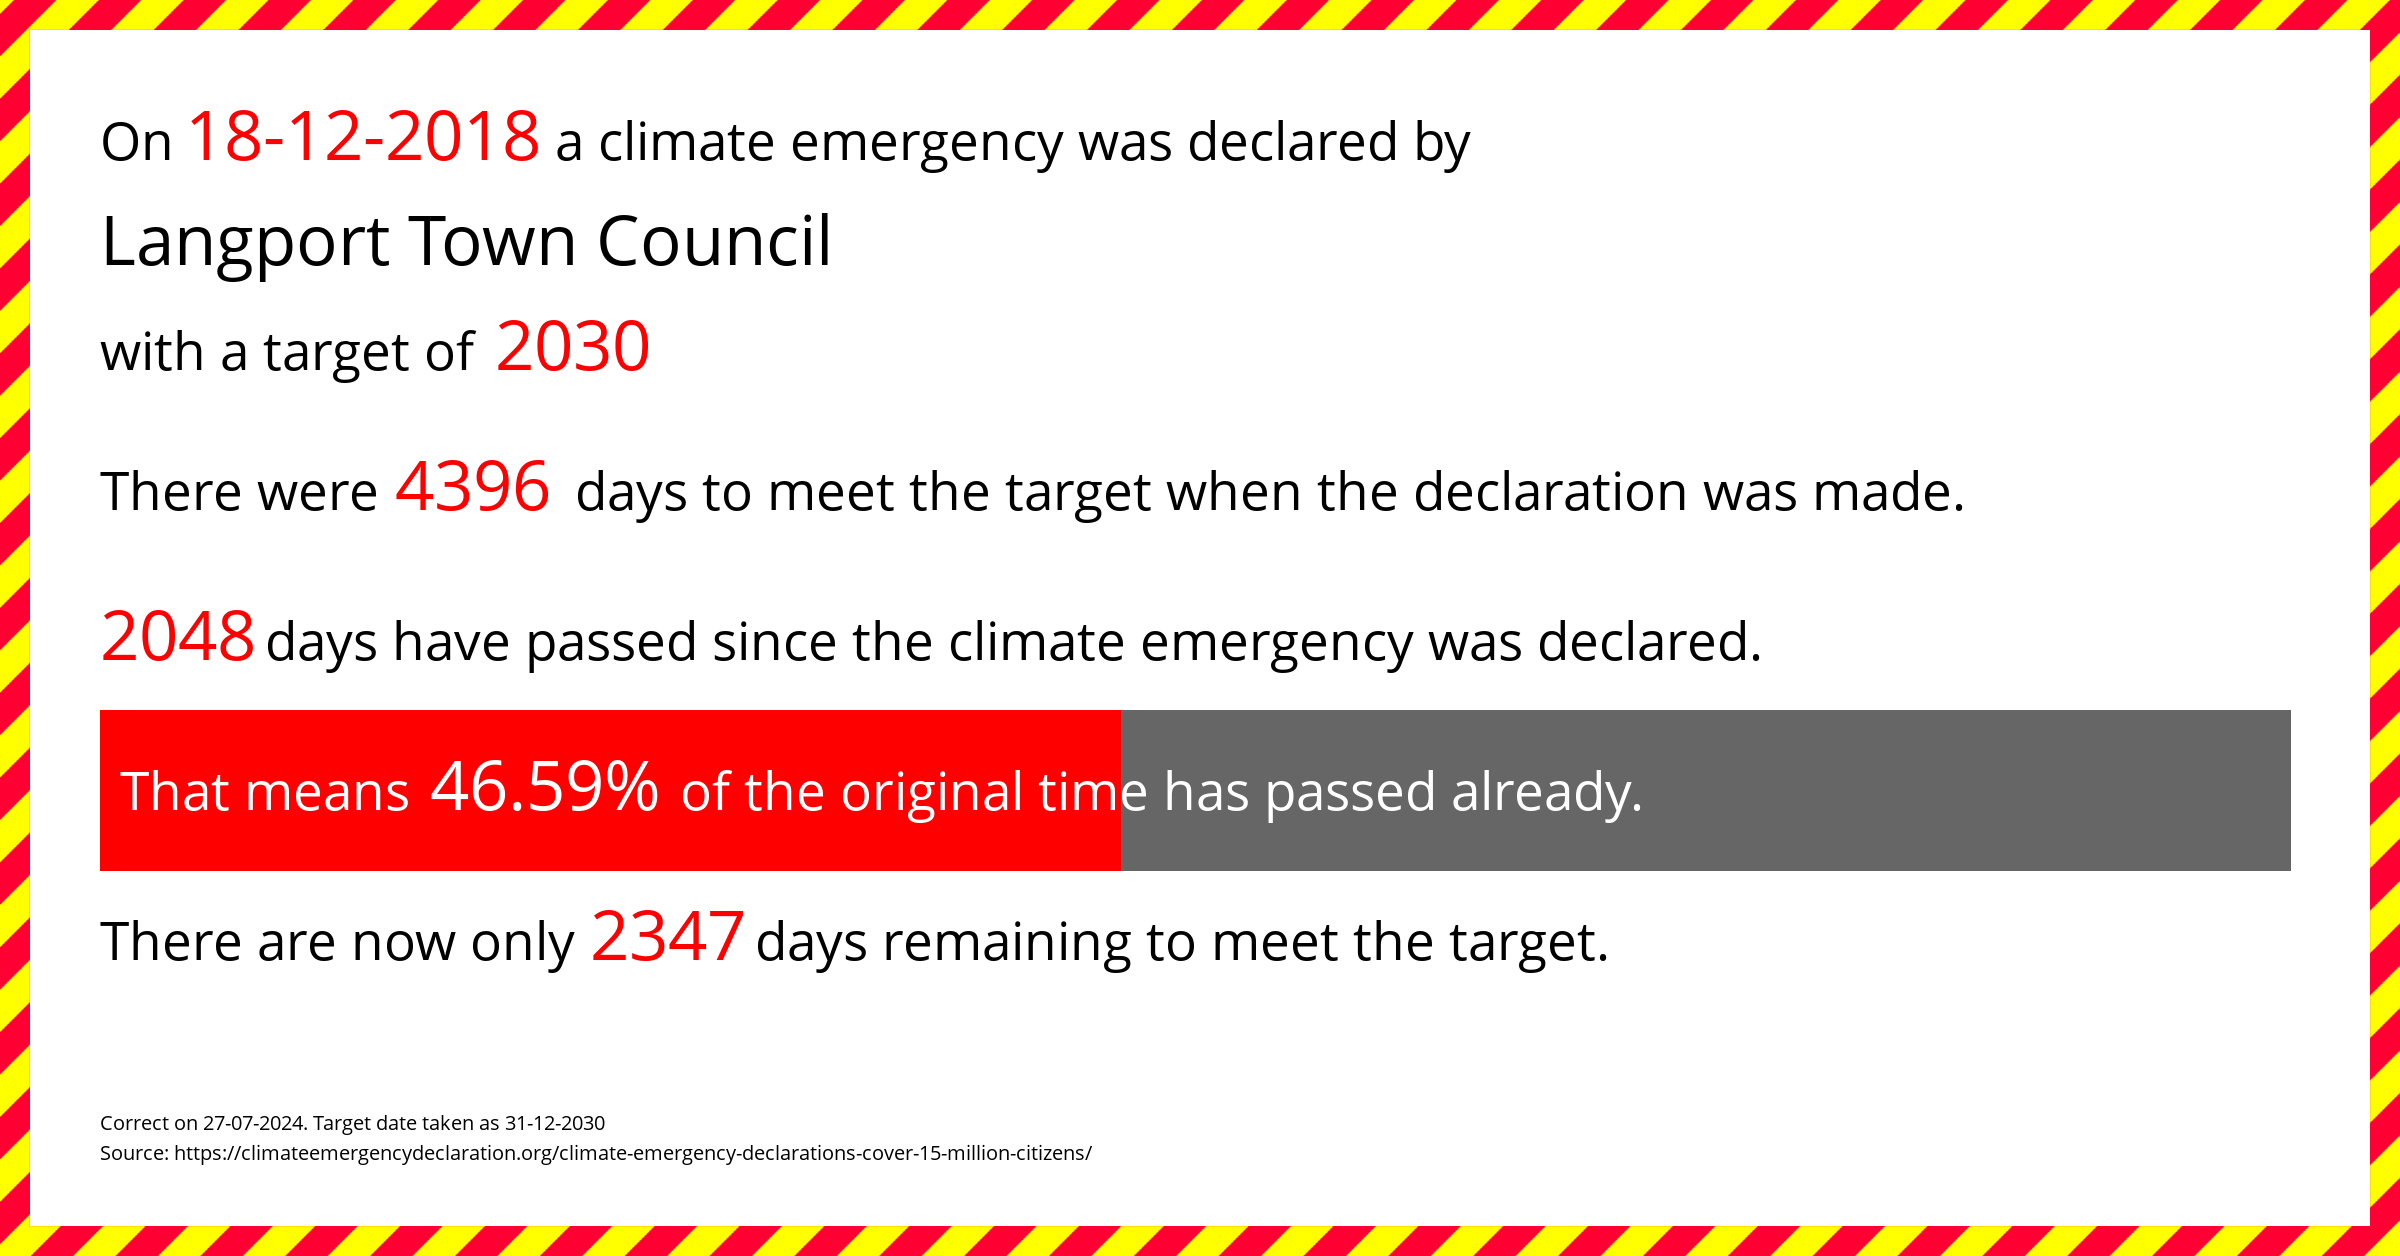 Langport Town Council declared a Climate emergency on Tuesday 18th December 2018, with a target of 2030.